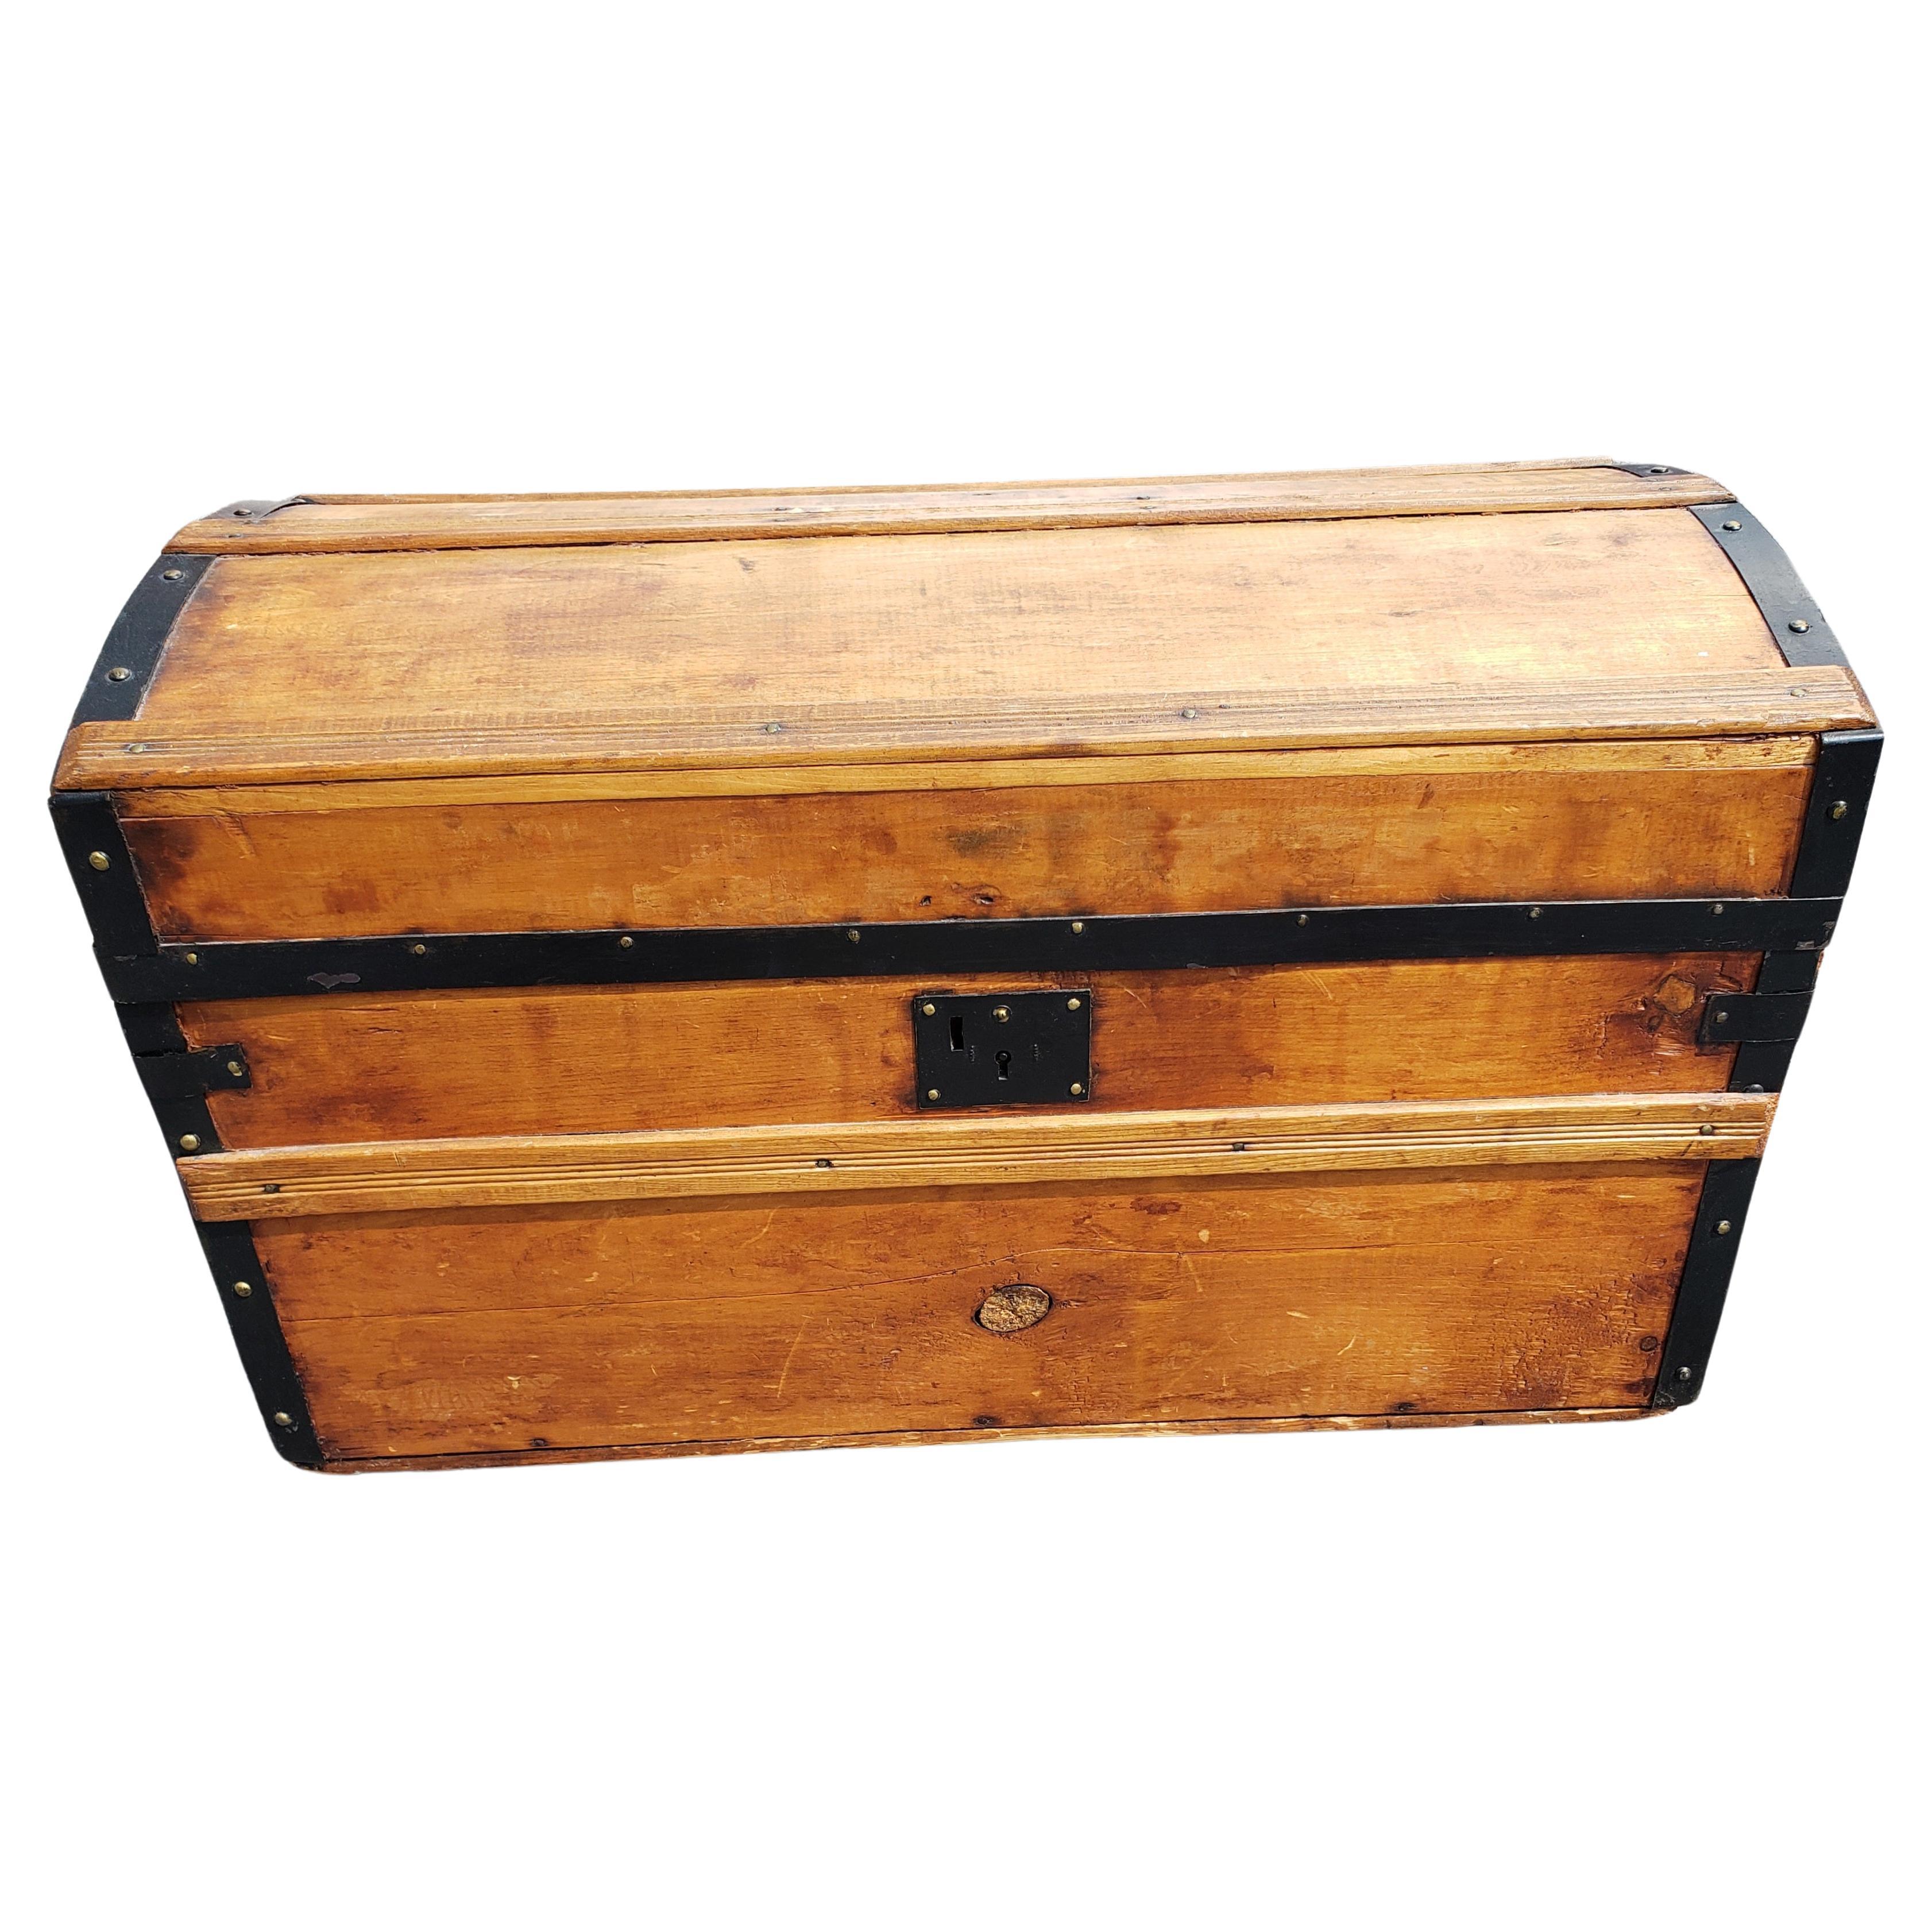 Early American Refinished Pine and Metal Blanket Chest Storage Trunk